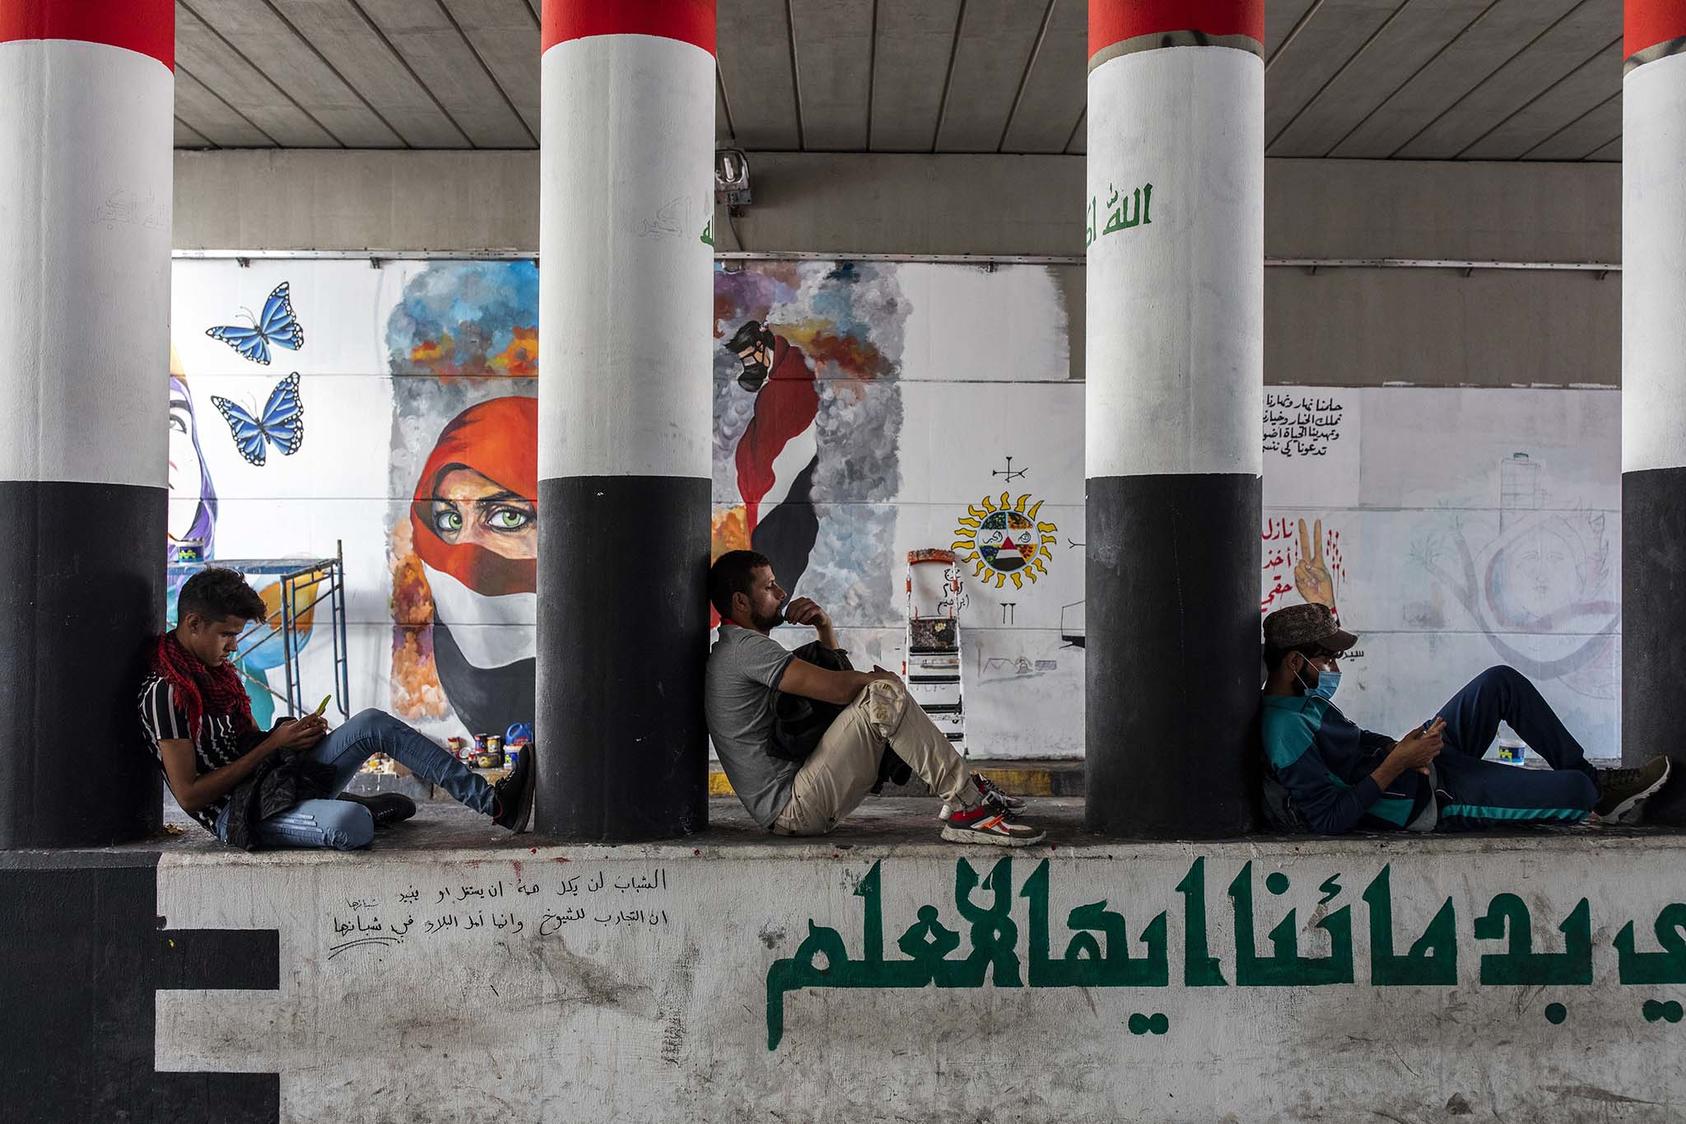 Protesters sit in front of murals in Baghdad on Nov. 22, 2019. Iraqis hit the streets in unprecedented numbers in October 2019, calling for political and economic reforms, greater job opportunities for youth and better government services. (Ivor Prickett/The New York Times)